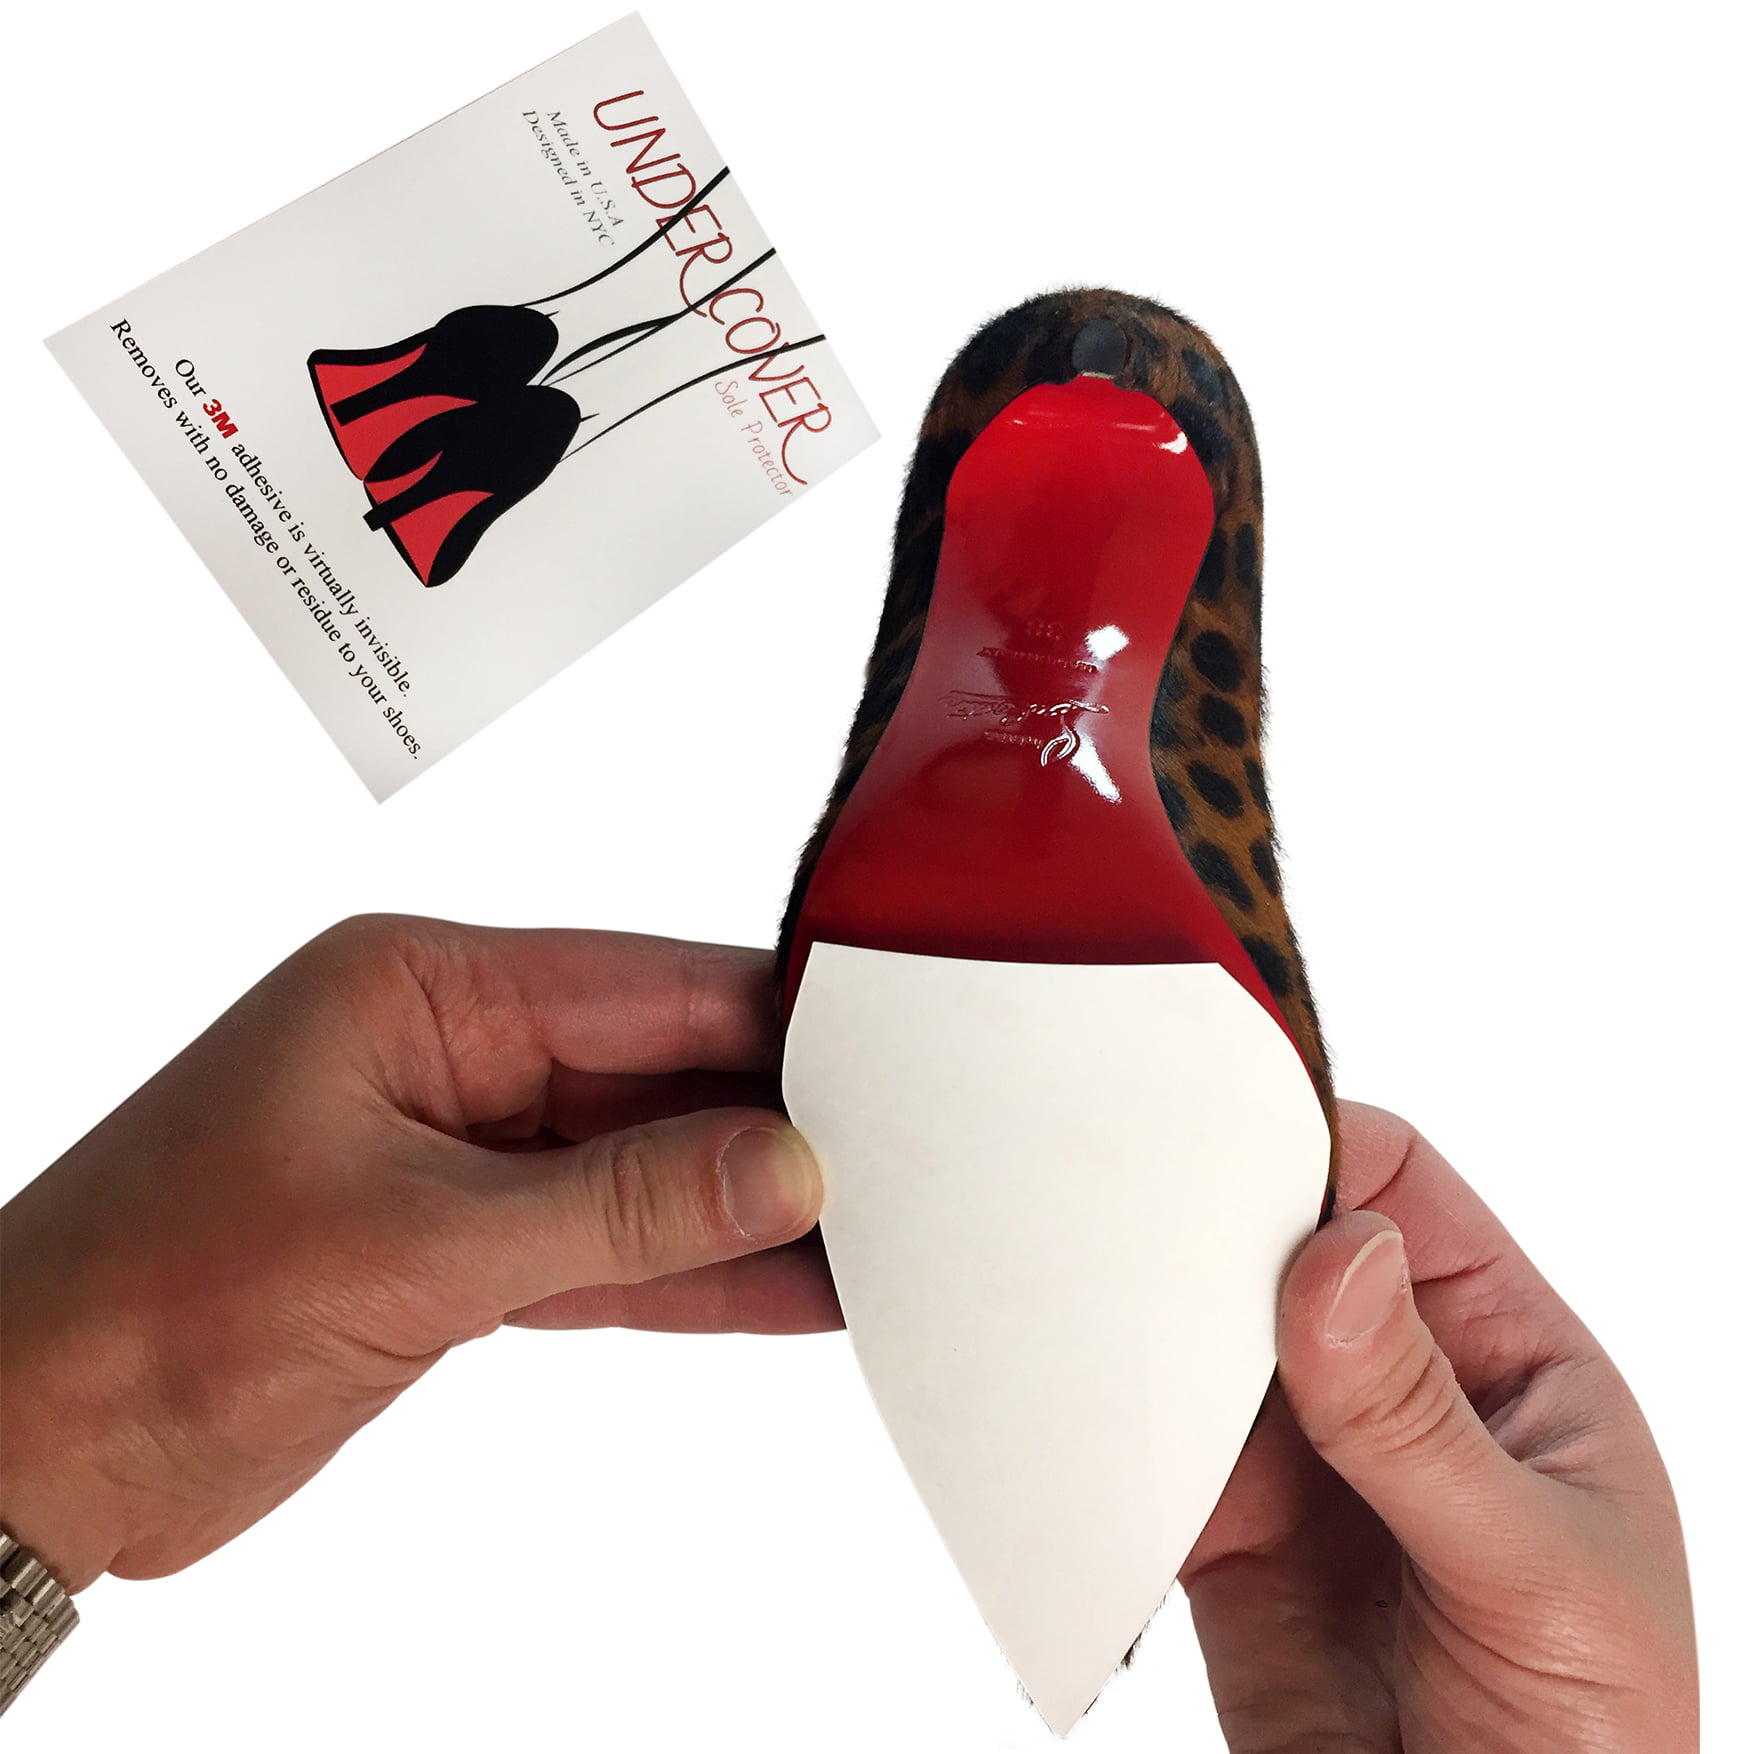 Sole Savior- (3 Pair!) Compatible Louboutin Sole Protector for Christian Louboutin Shoes, Red Bottom Protectors for Luxury Shoes- Christian